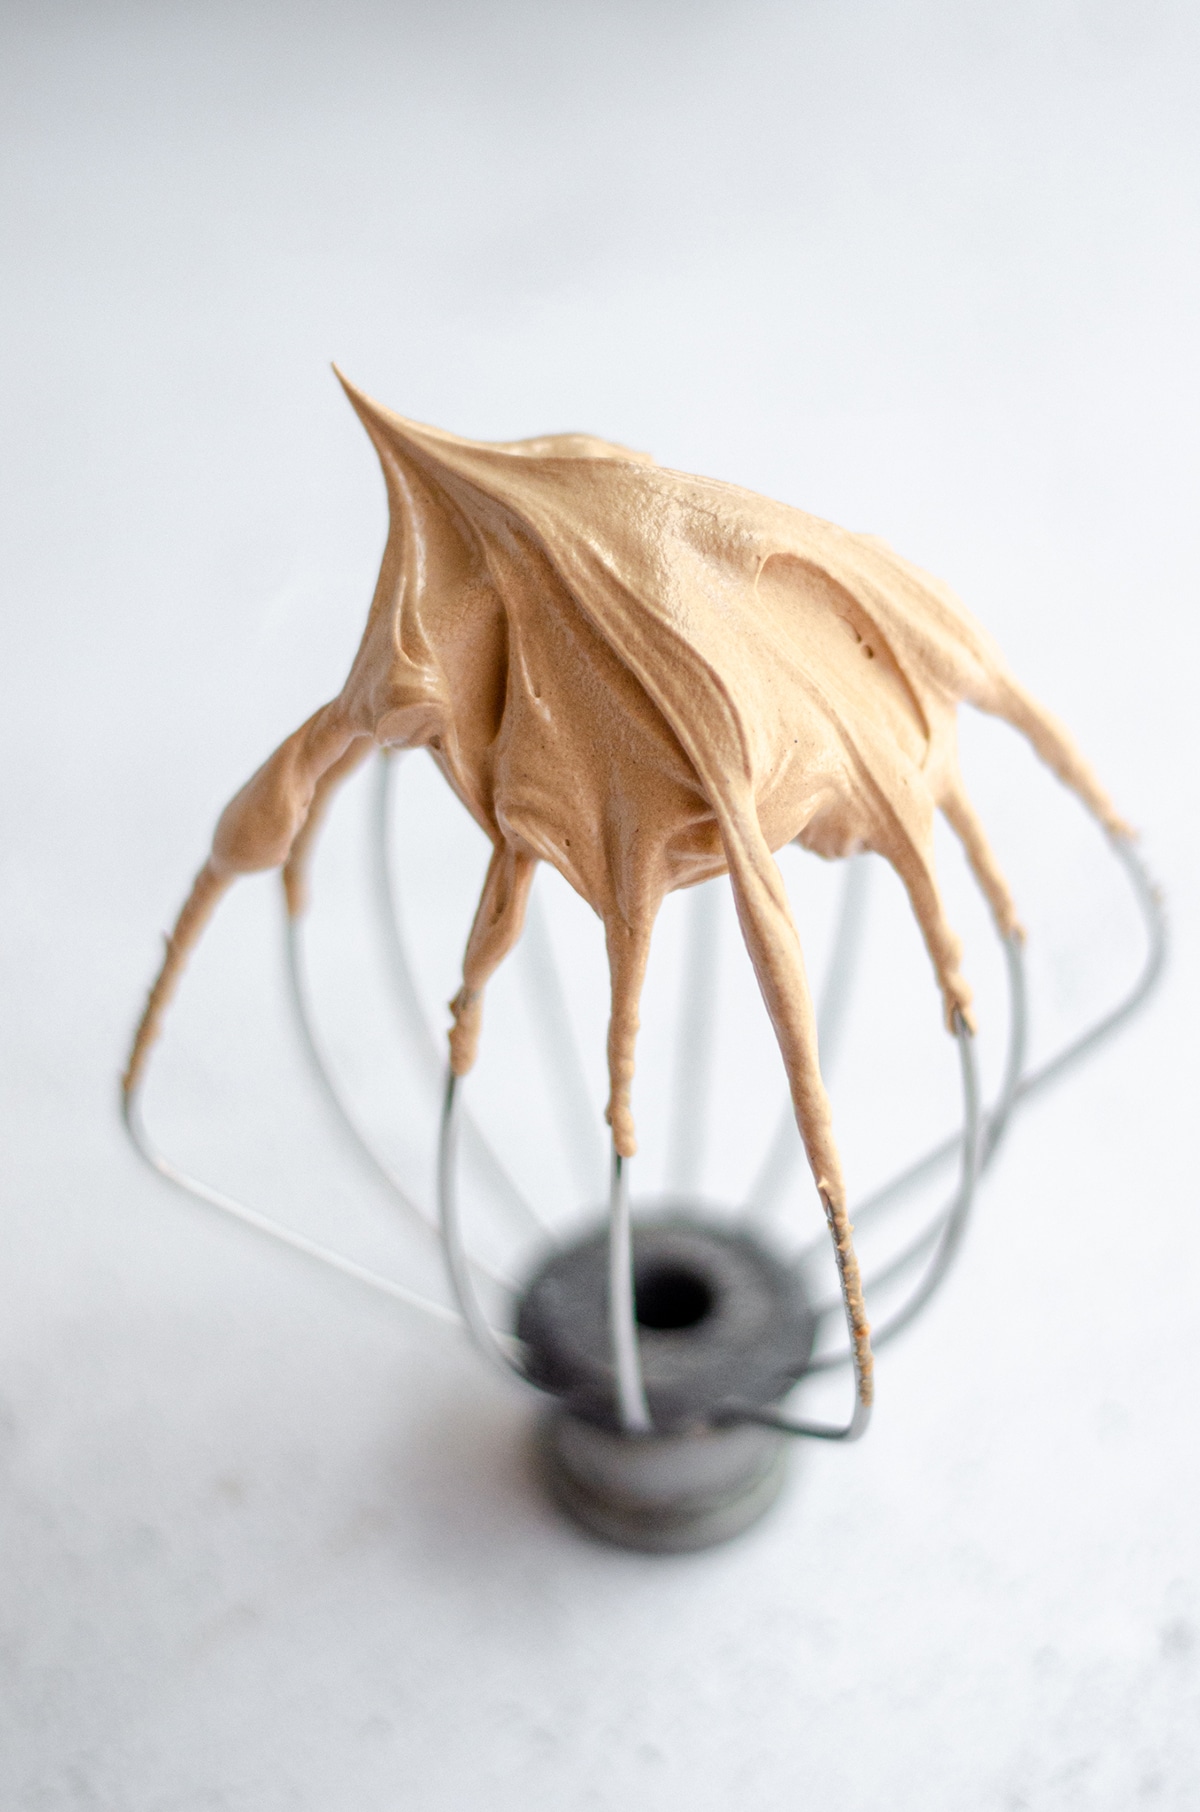 whisk attachment for a stand mixer with chocolate swiss meringue buttercream peaks on the tip